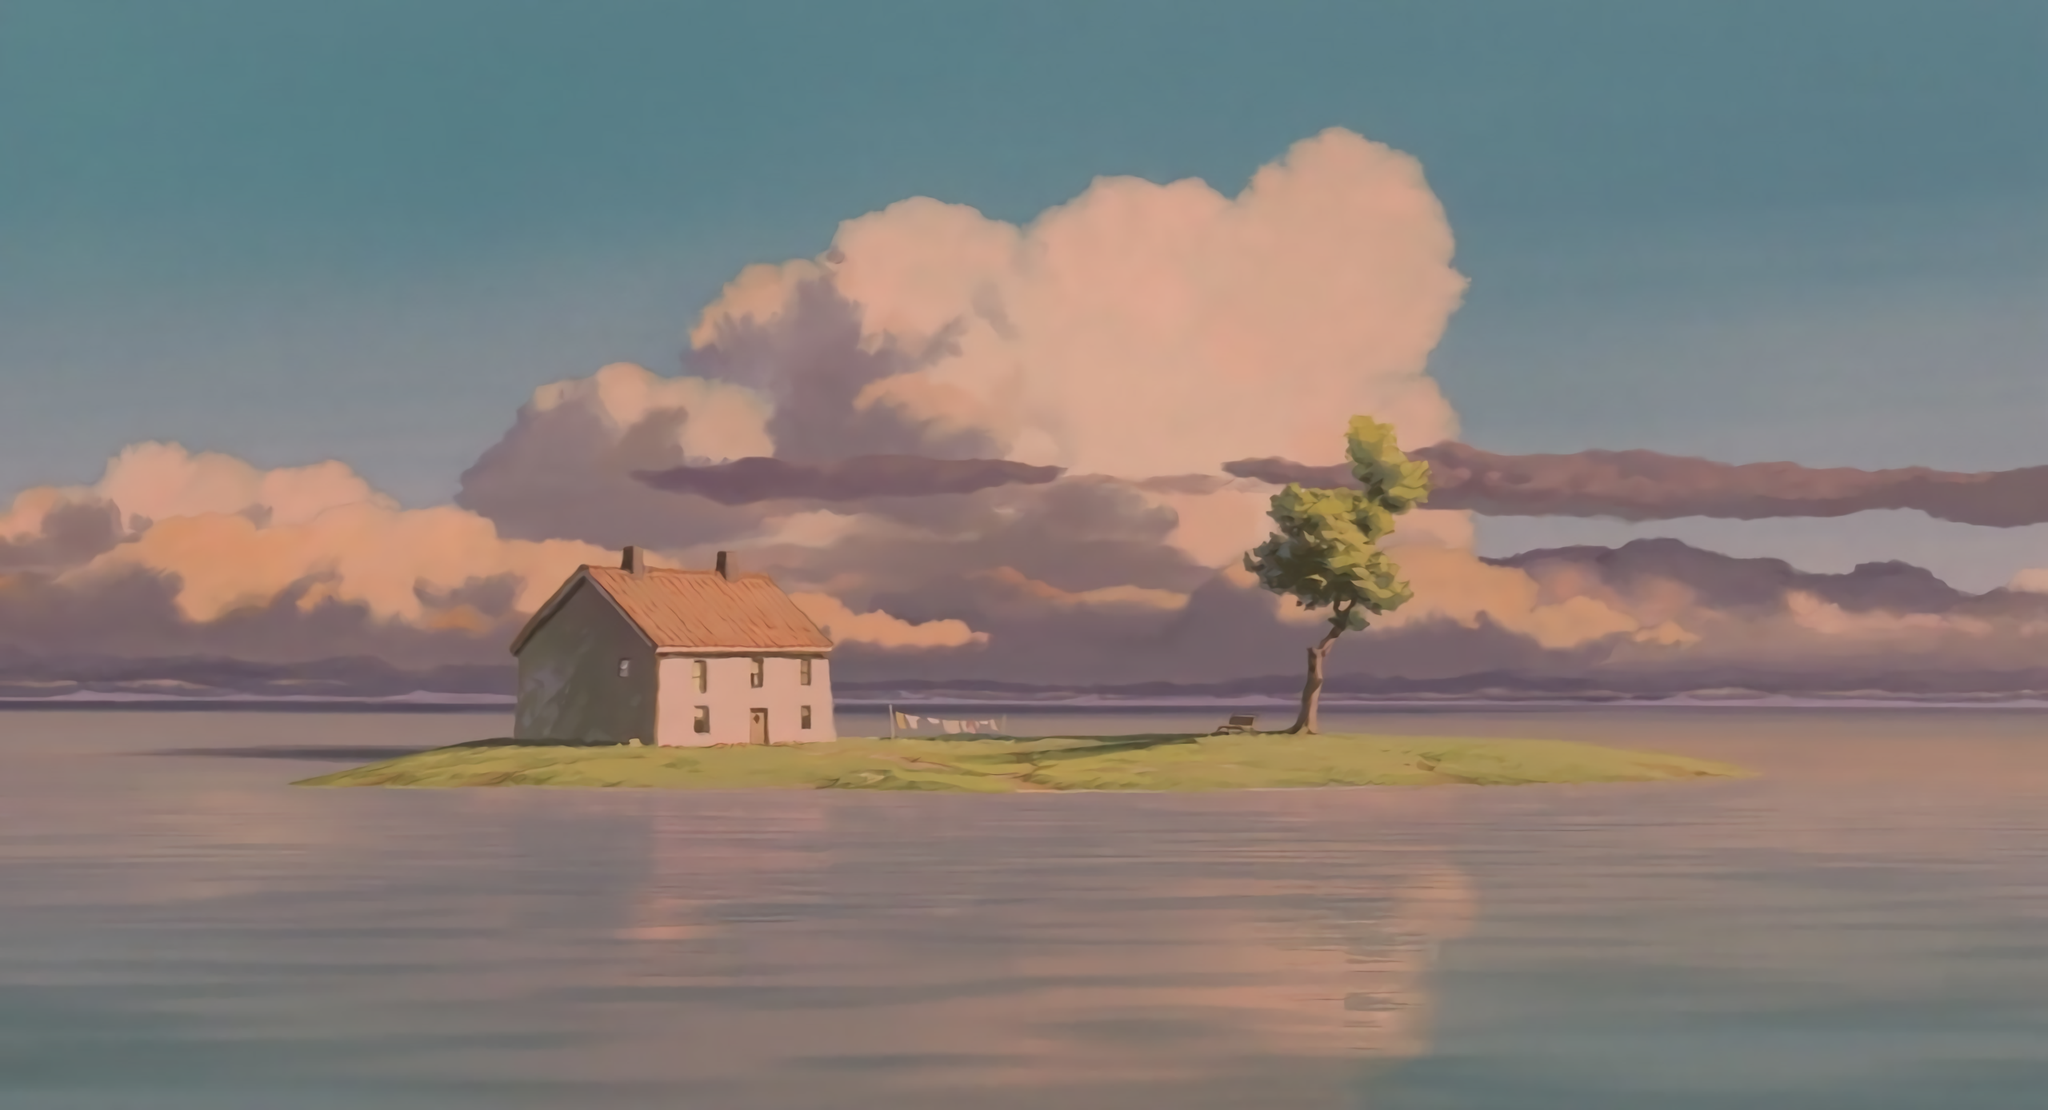 Some HD wallpapers from Spirited Aways train scene. Pure serenity